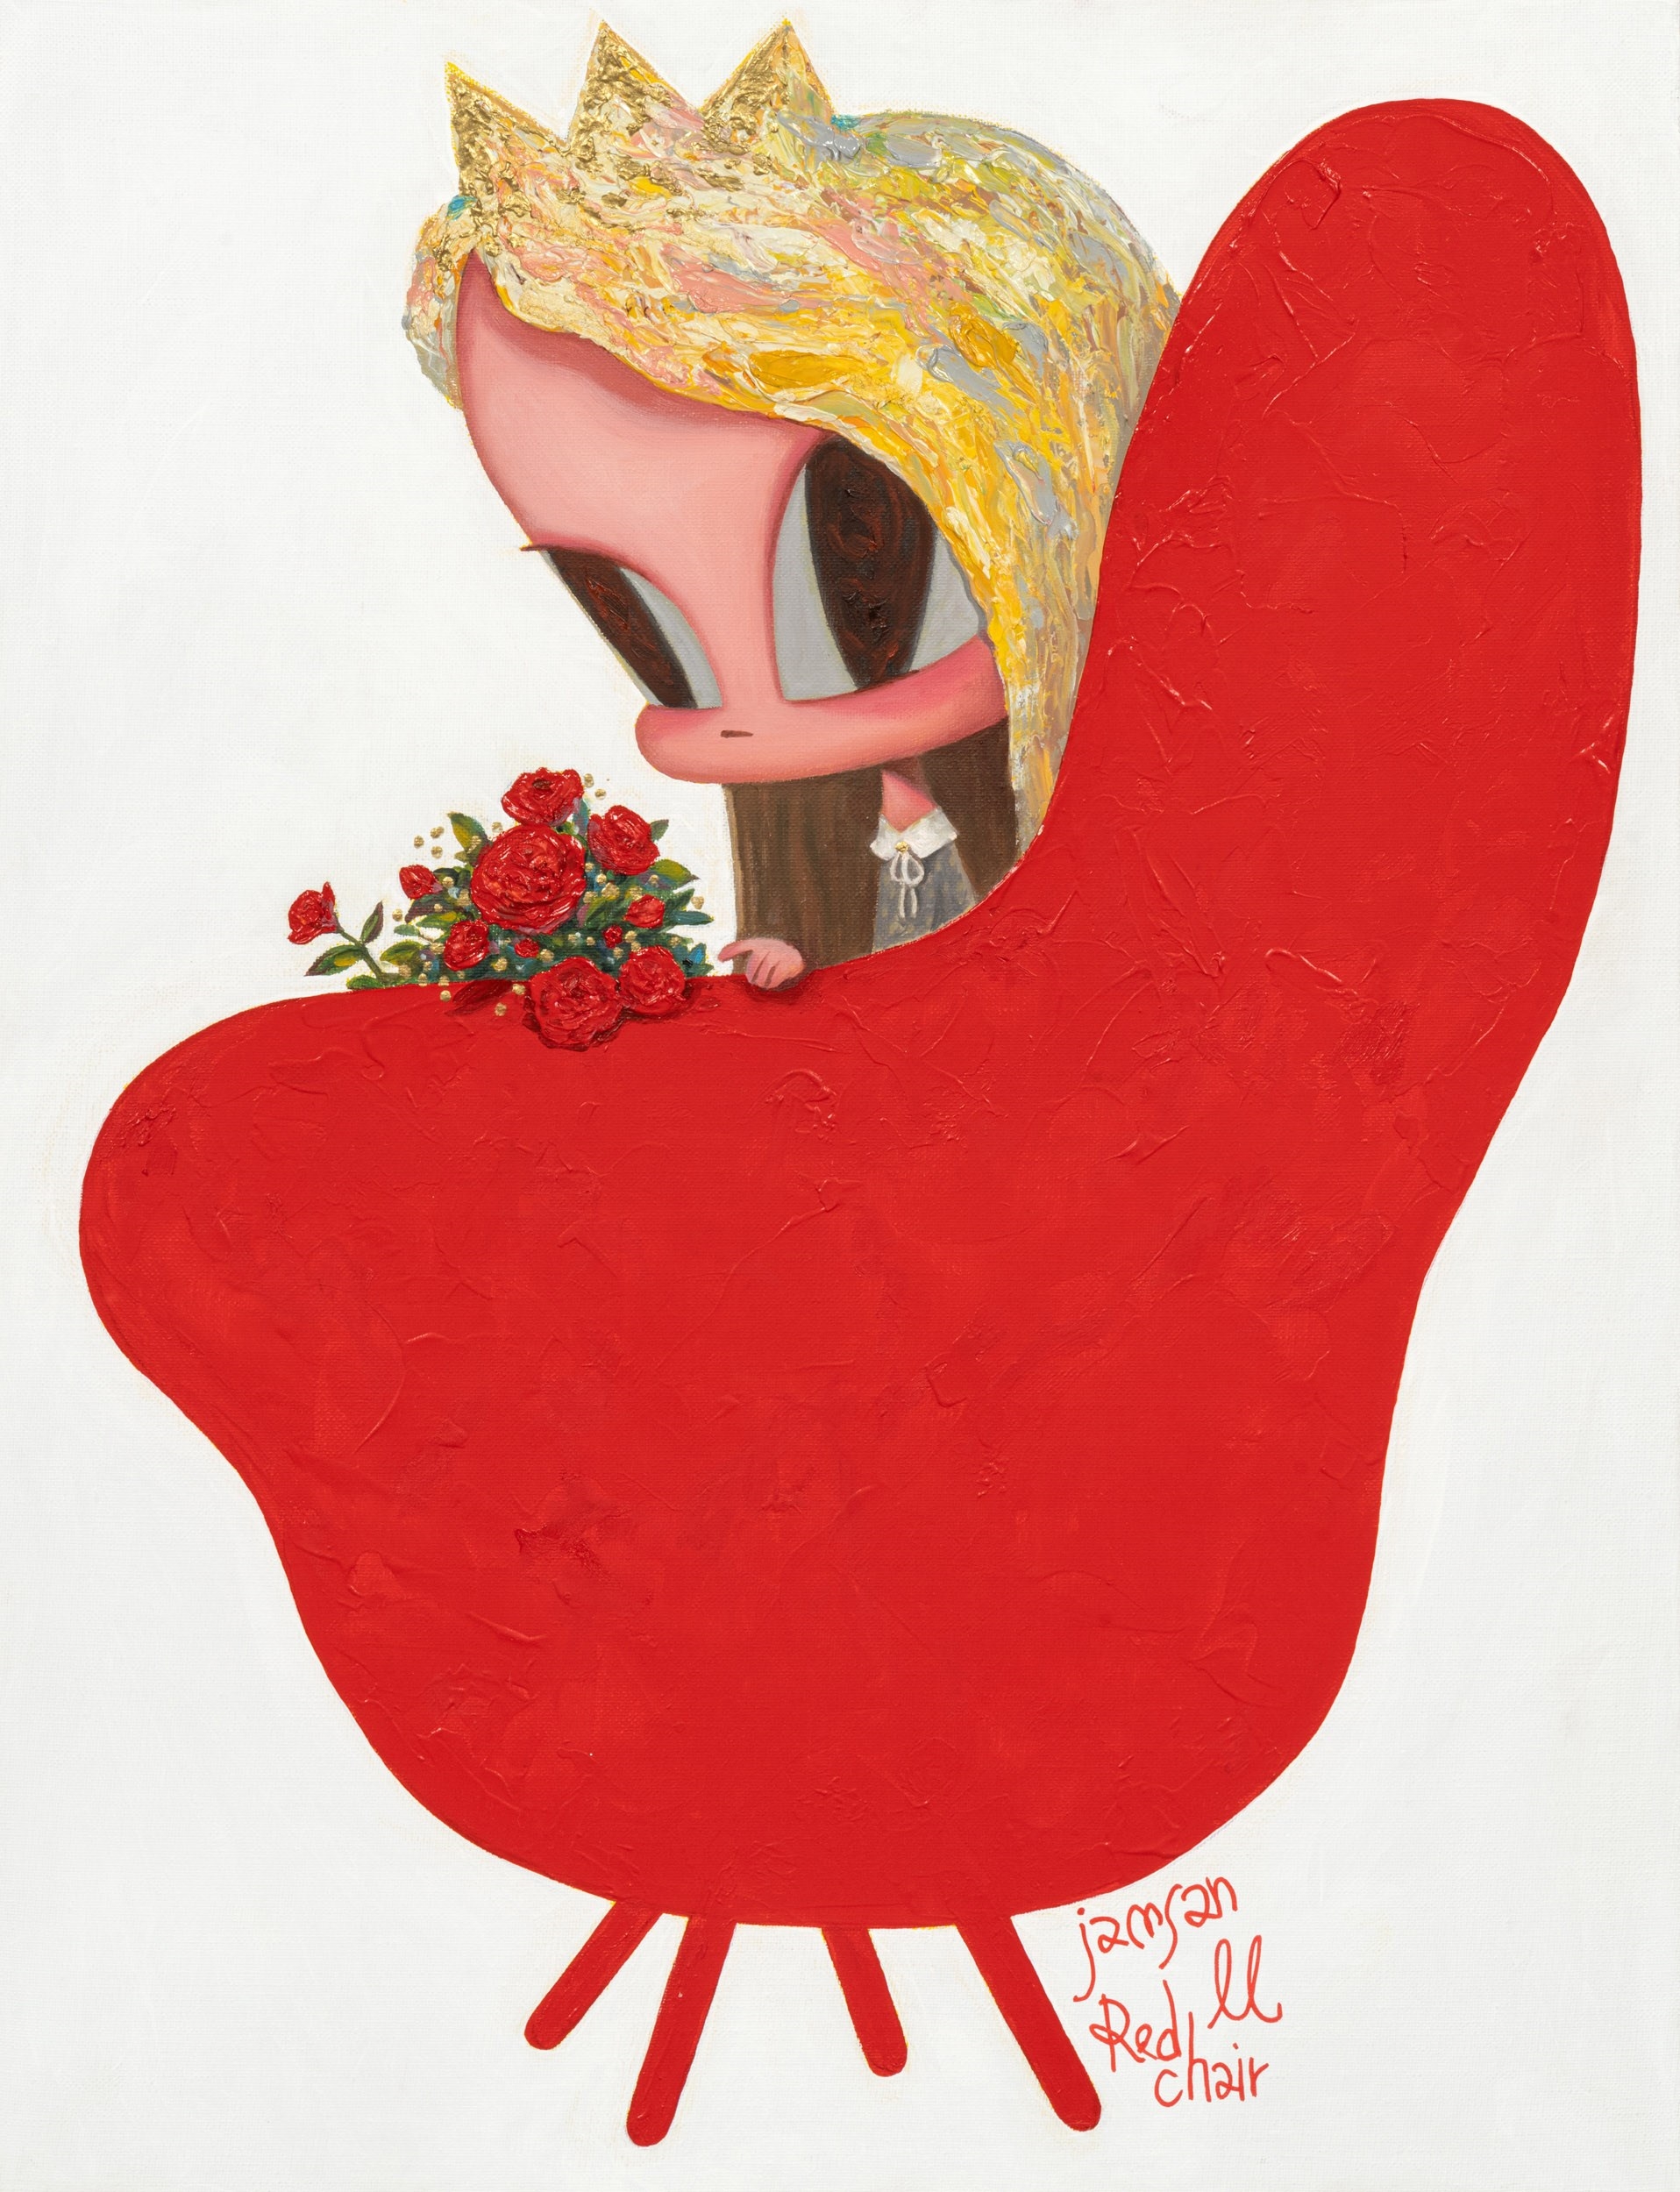 Artwork by Jam San, Red Chair, Made of oil on canvas